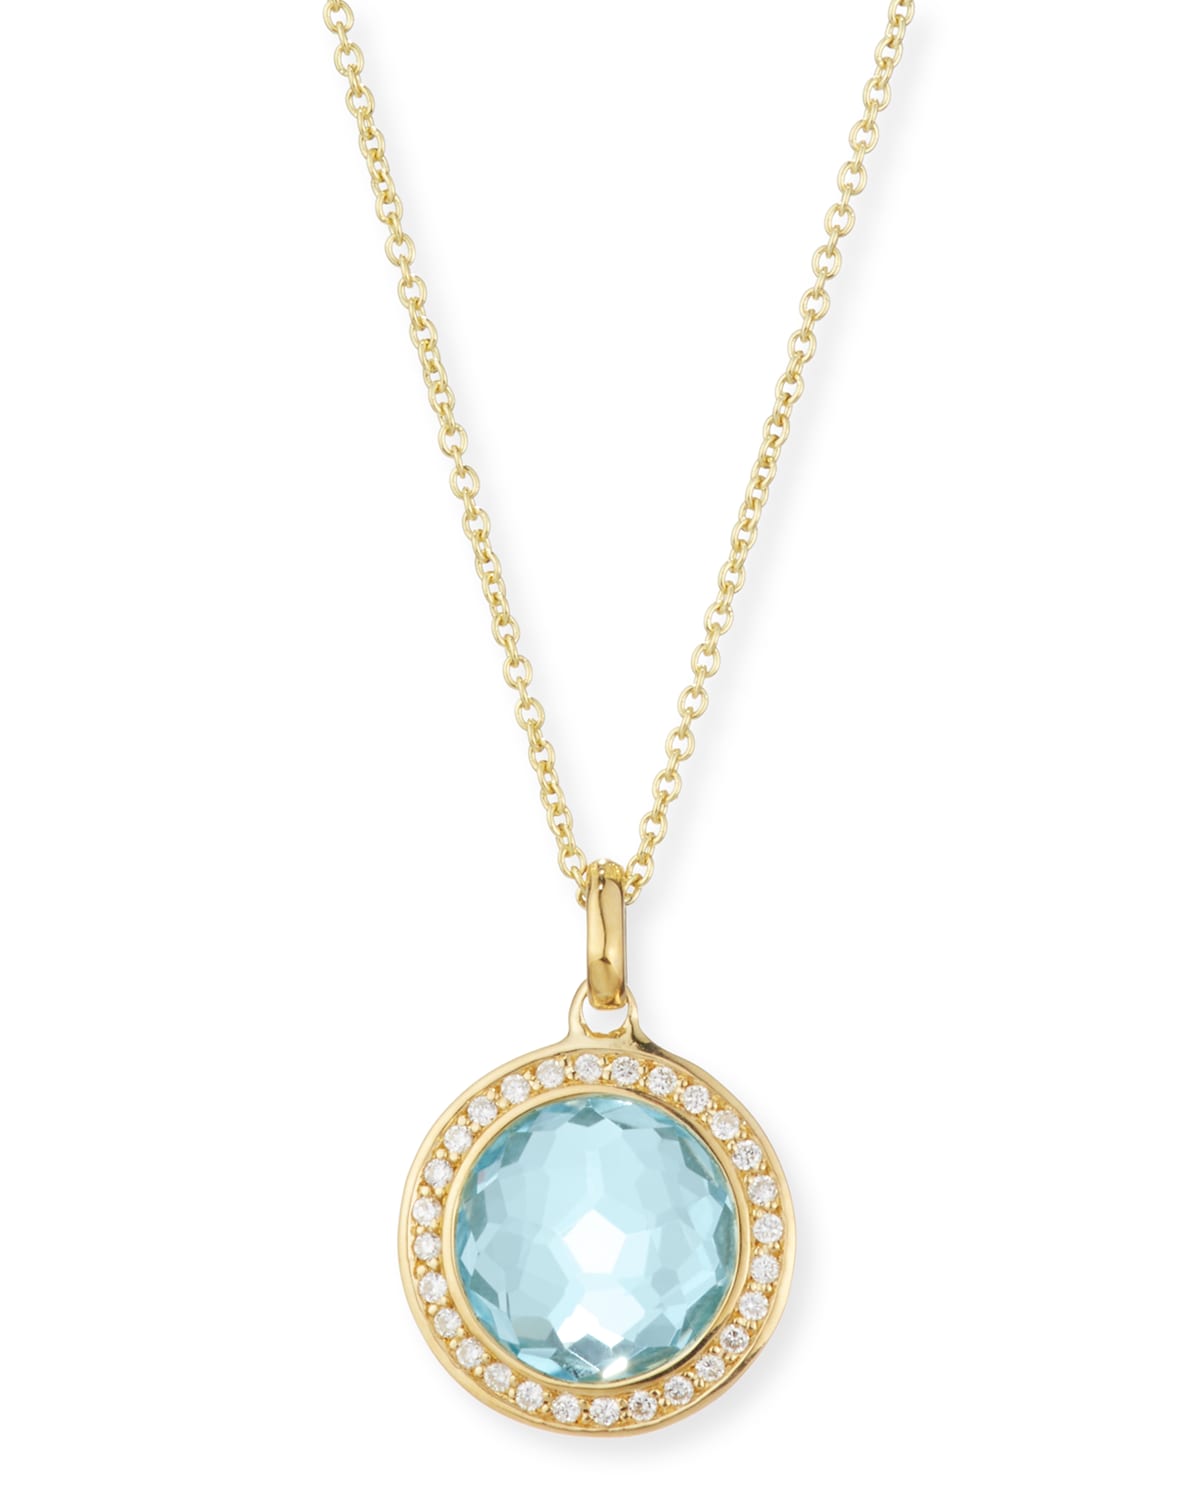 IPPOLITA SMALL PENDANT NECKLACE IN 18K GOLD WITH DIAMONDS